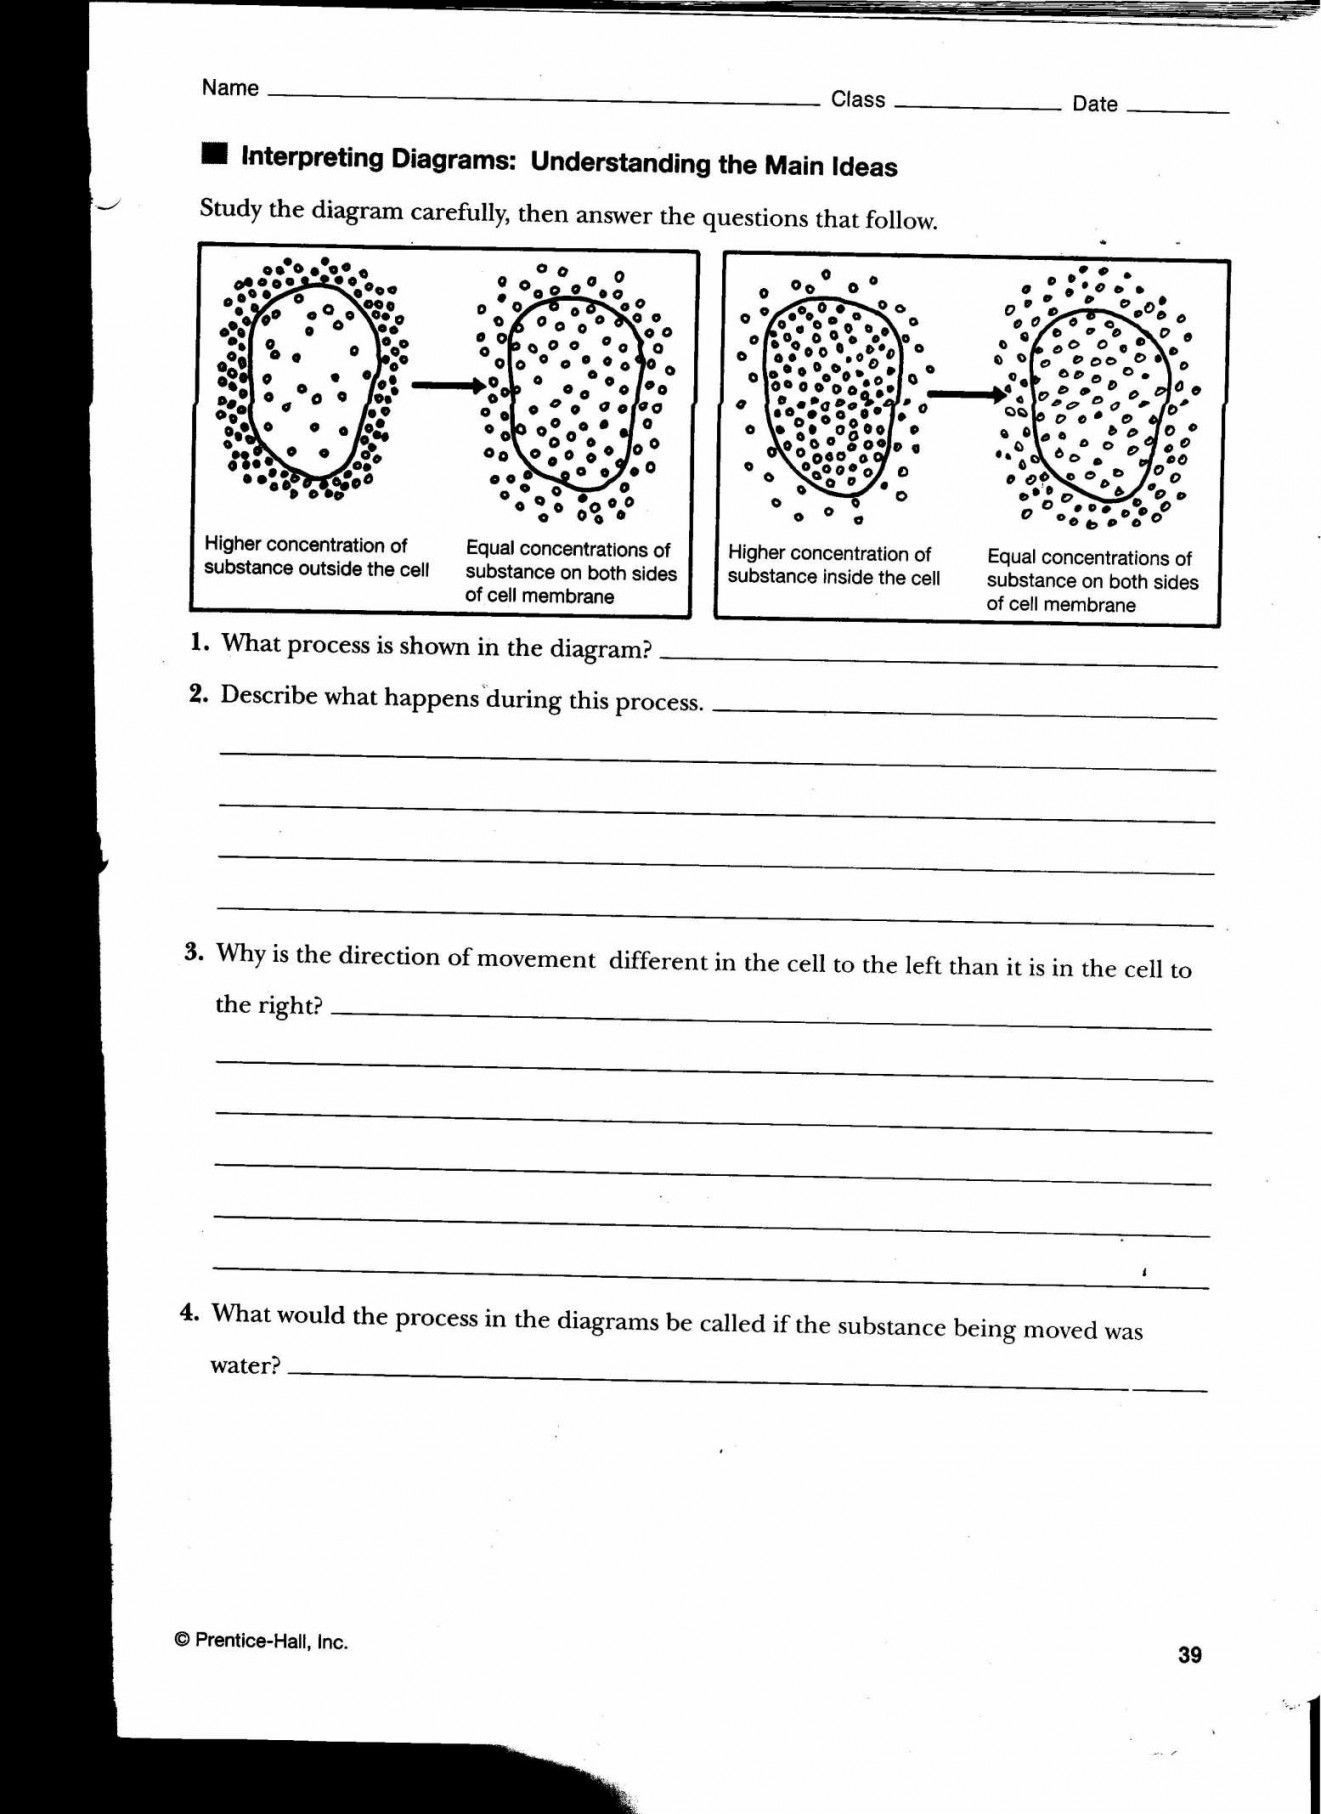 Osmosis And Tonicity Worksheet Answers db excel com